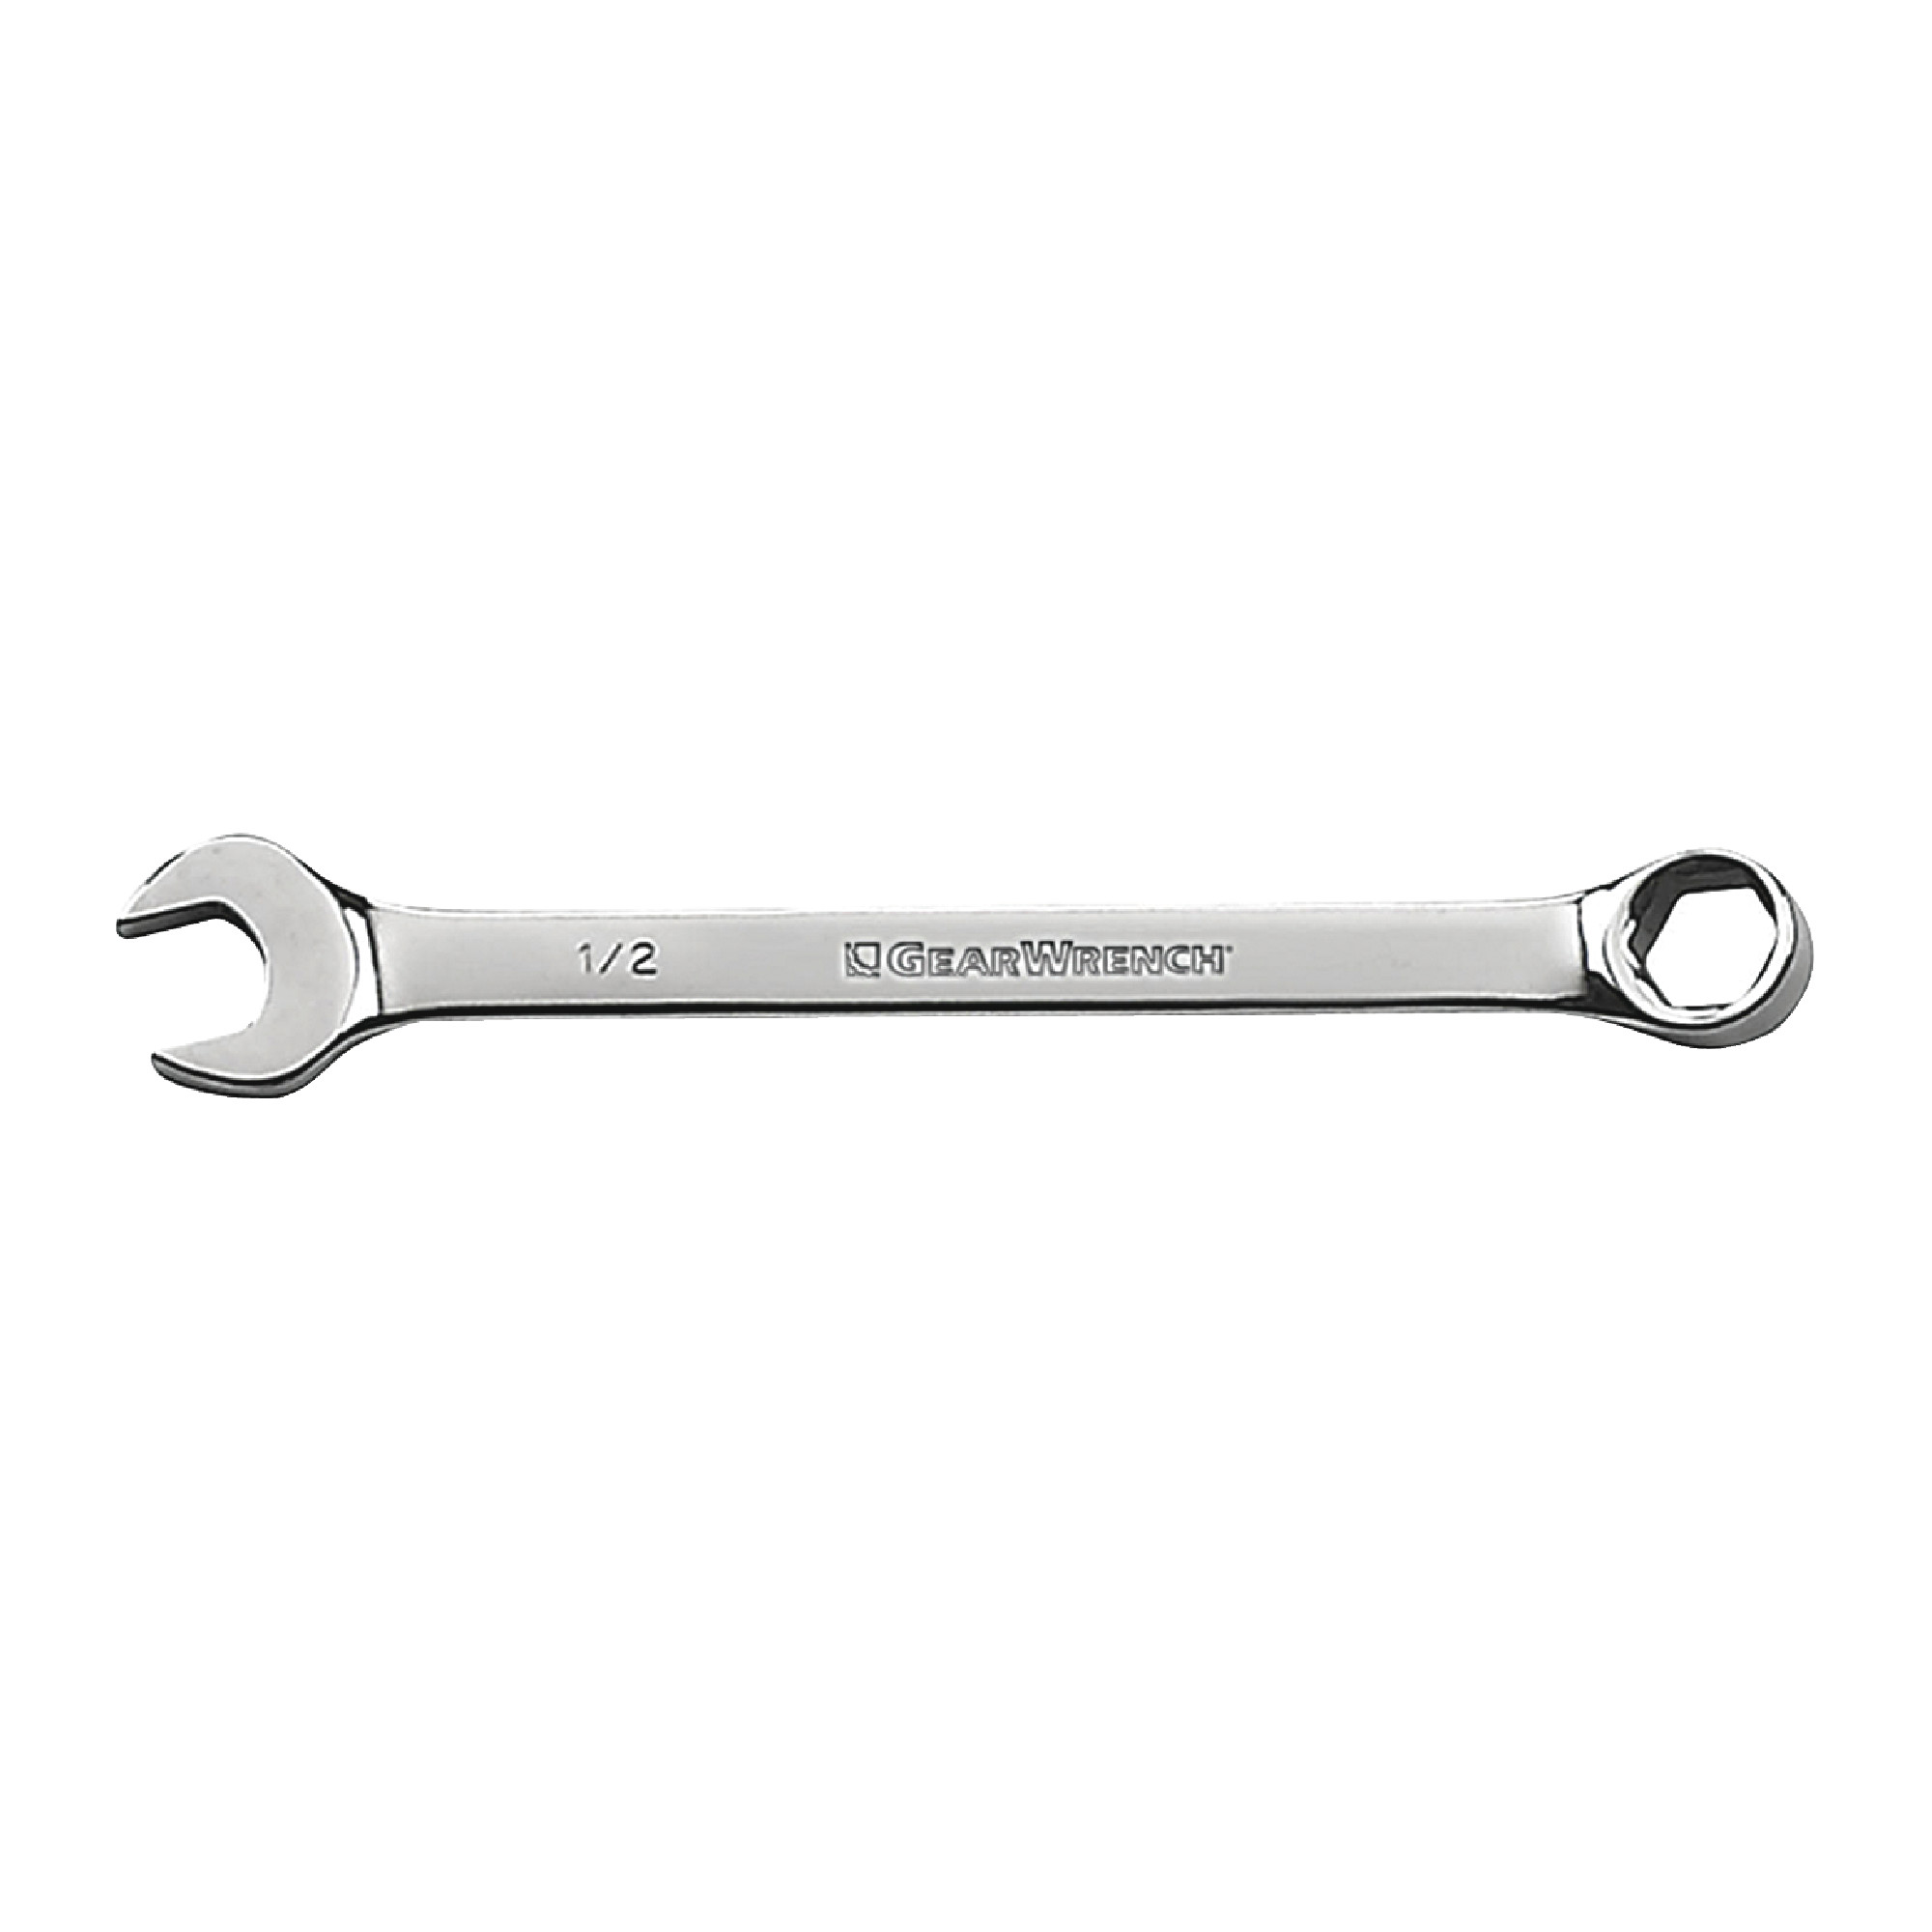 1/2" 6 Point Combination Wrench